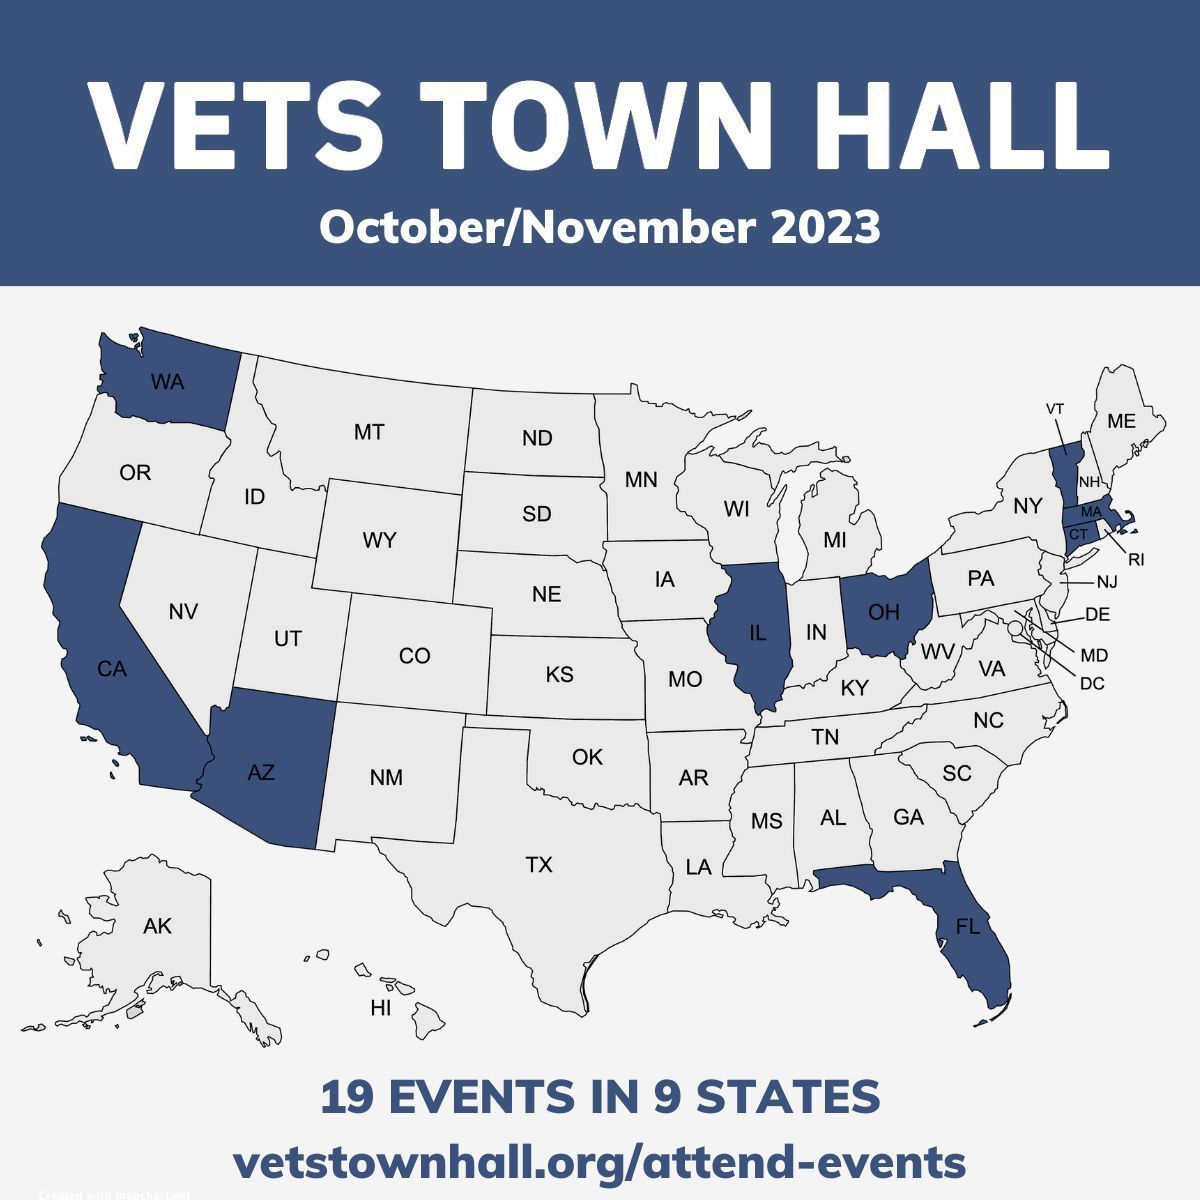 This is our first full calendar year as an organization, and we have 19 events in 9 states scheduled for this October/November. Each event is spearheaded by a local organizer with the aim of increasing understanding between veterans and non-veterans. vetstownhall.org/attend-events/